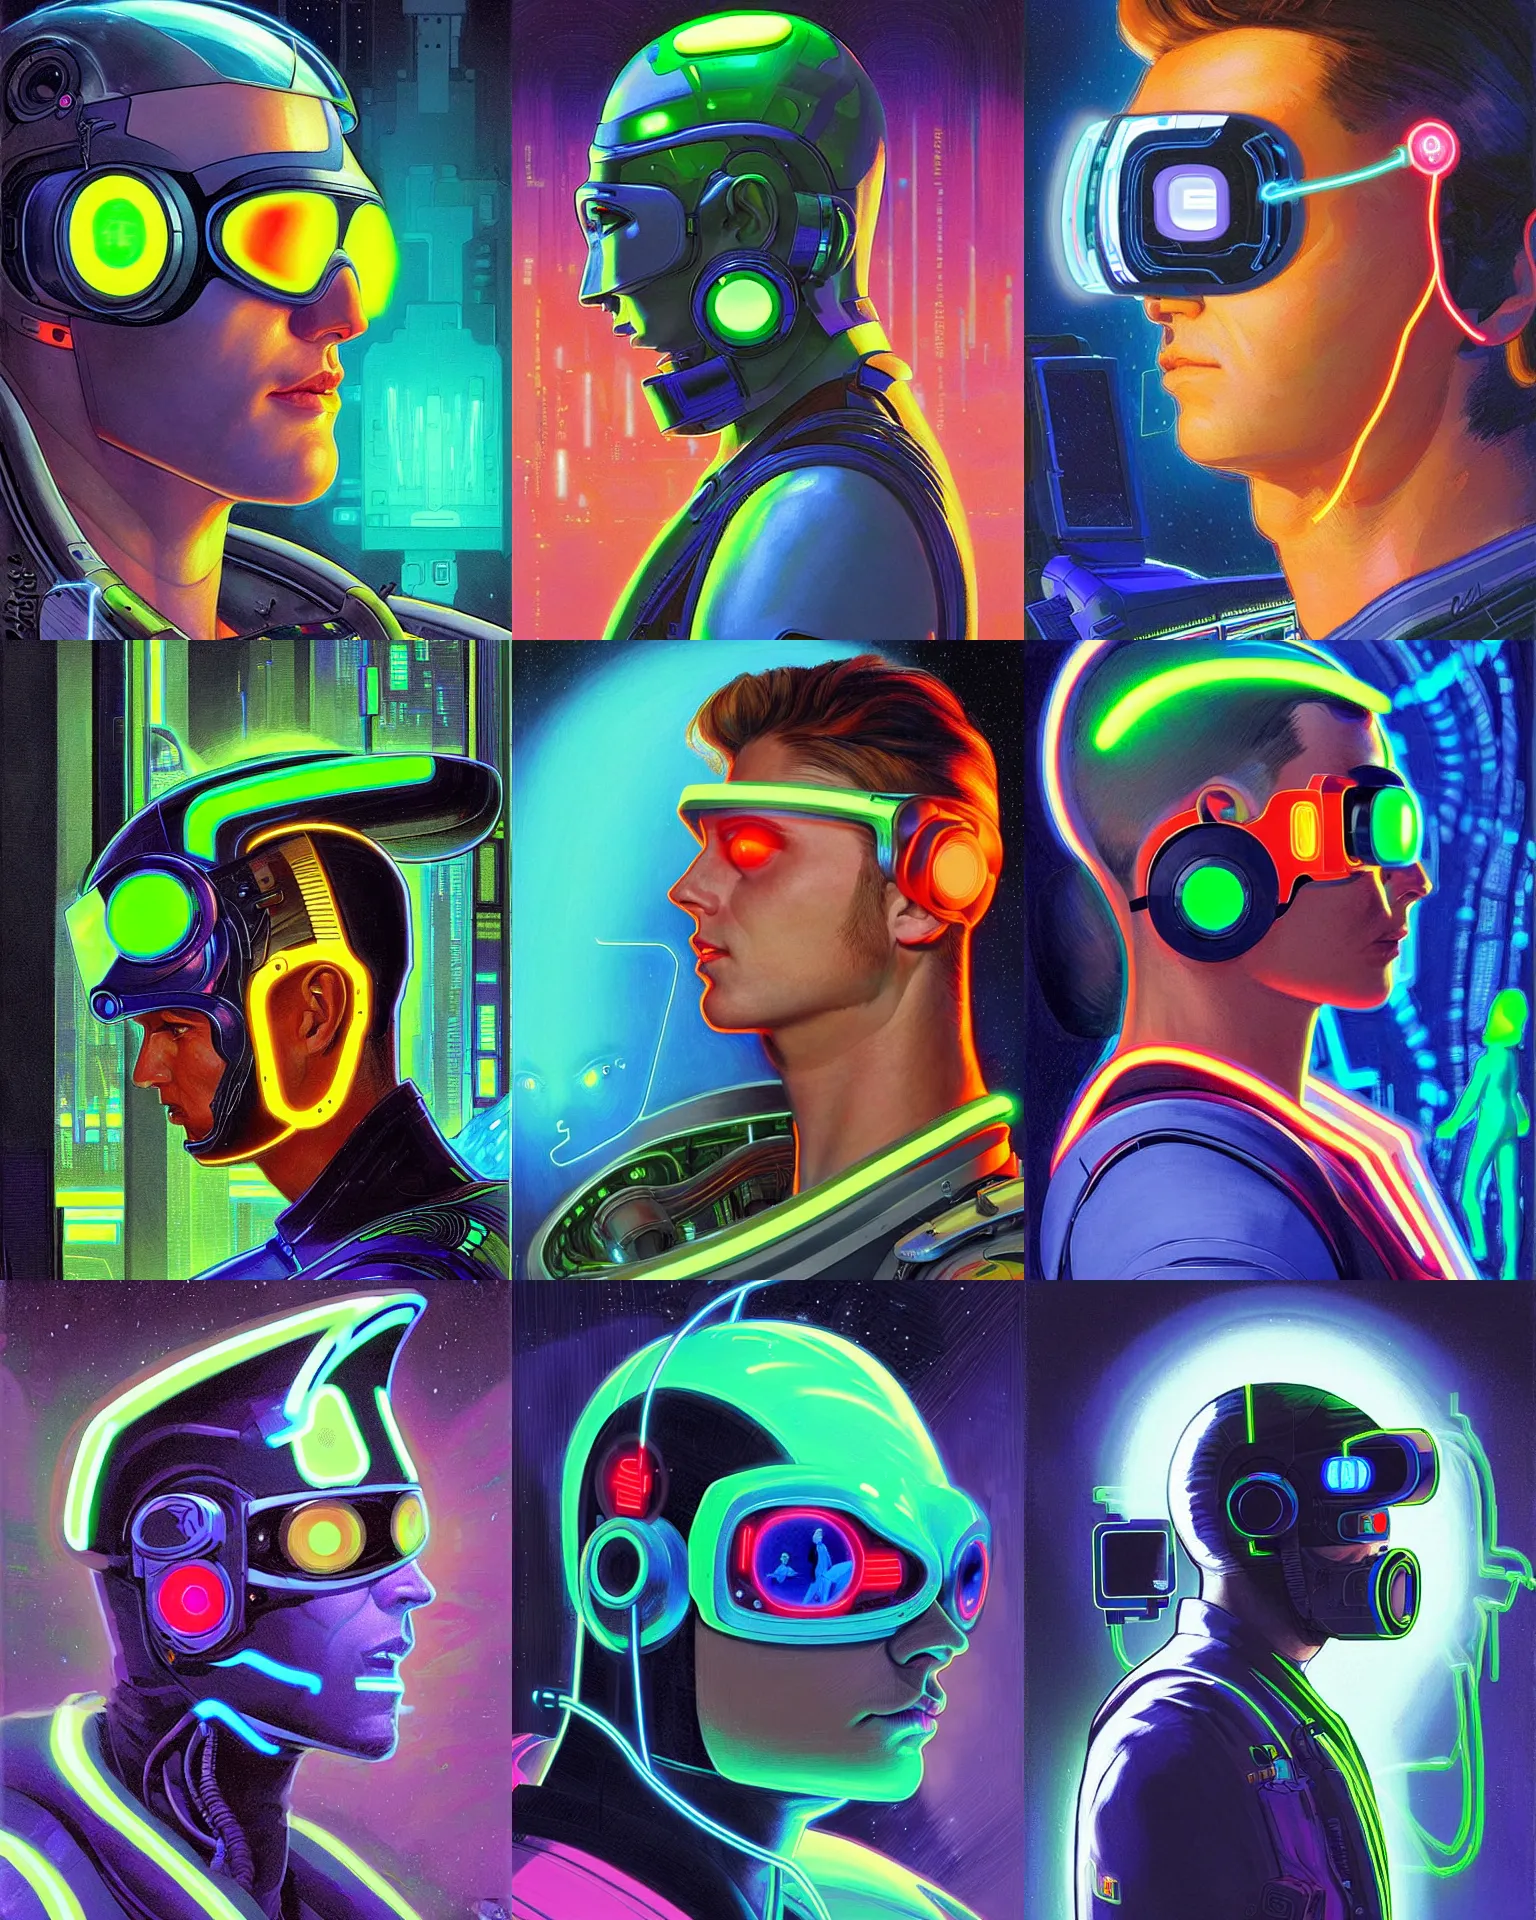 Prompt: sillouete side view future coder man, sleek cyclops display over eyes and glowing headset, neon accents, holographic colors, desaturated headshot portrait digital painting by charles camoin ivan bilibin, dean cornwall, donato giancola, john berkey, astronaut cyberpunk electric lights profile